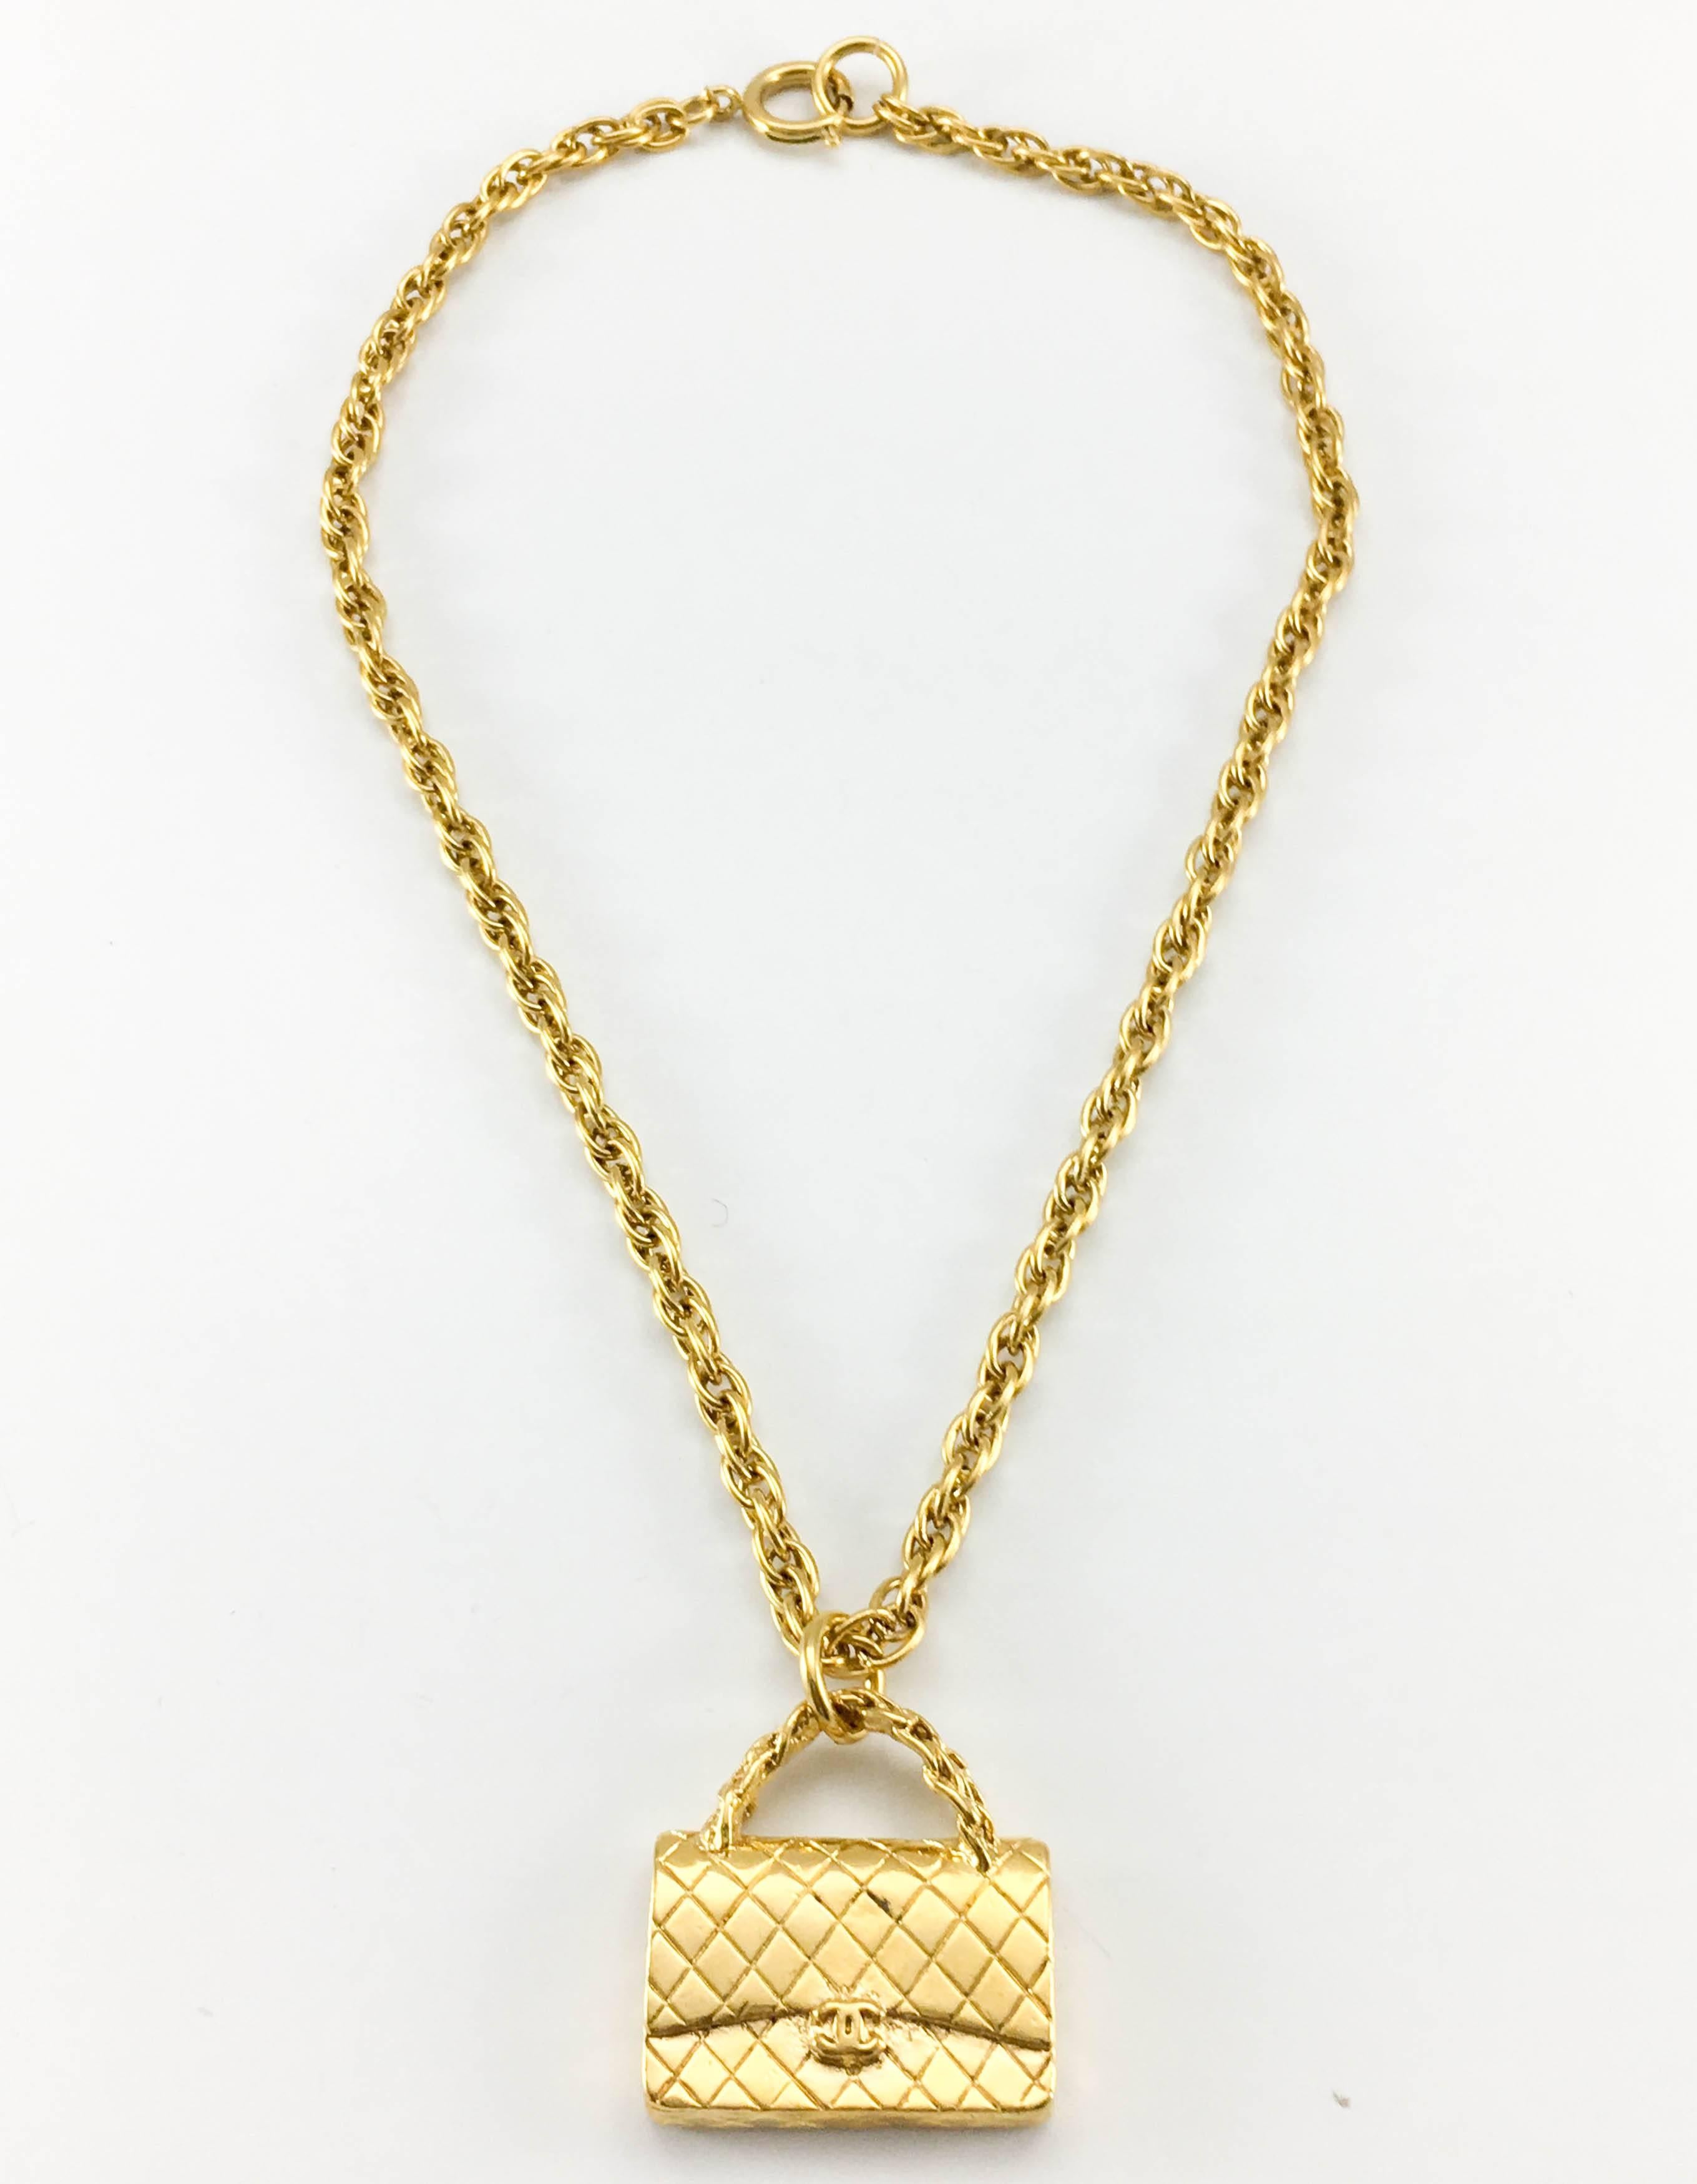 1994 Chanel Gold-Plated 2.55 Quilted Handbag Pendant Necklace In Excellent Condition For Sale In London, Chelsea